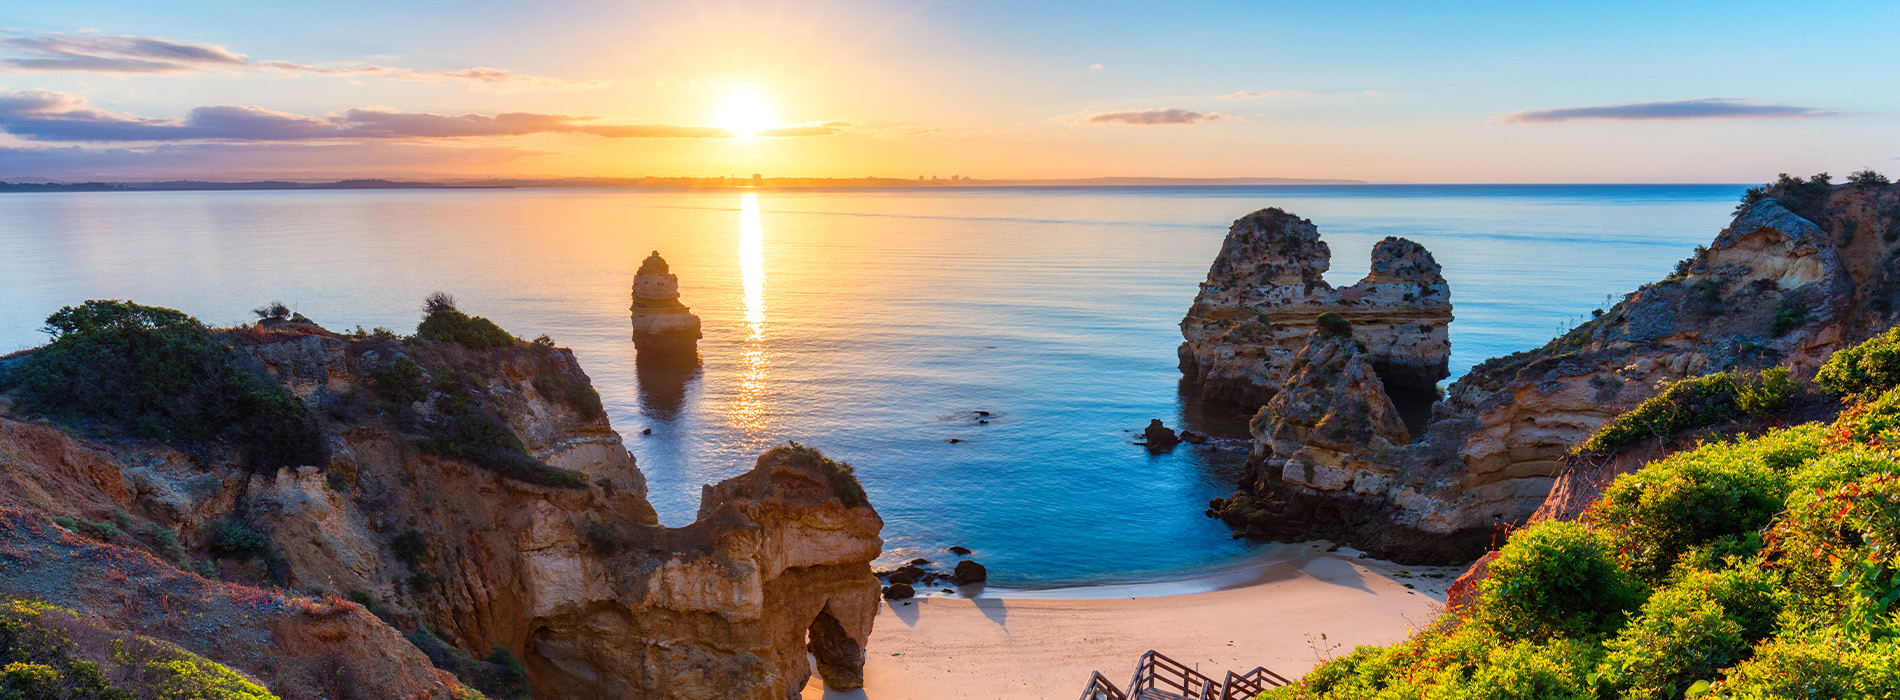 What’s new in the Algarve?